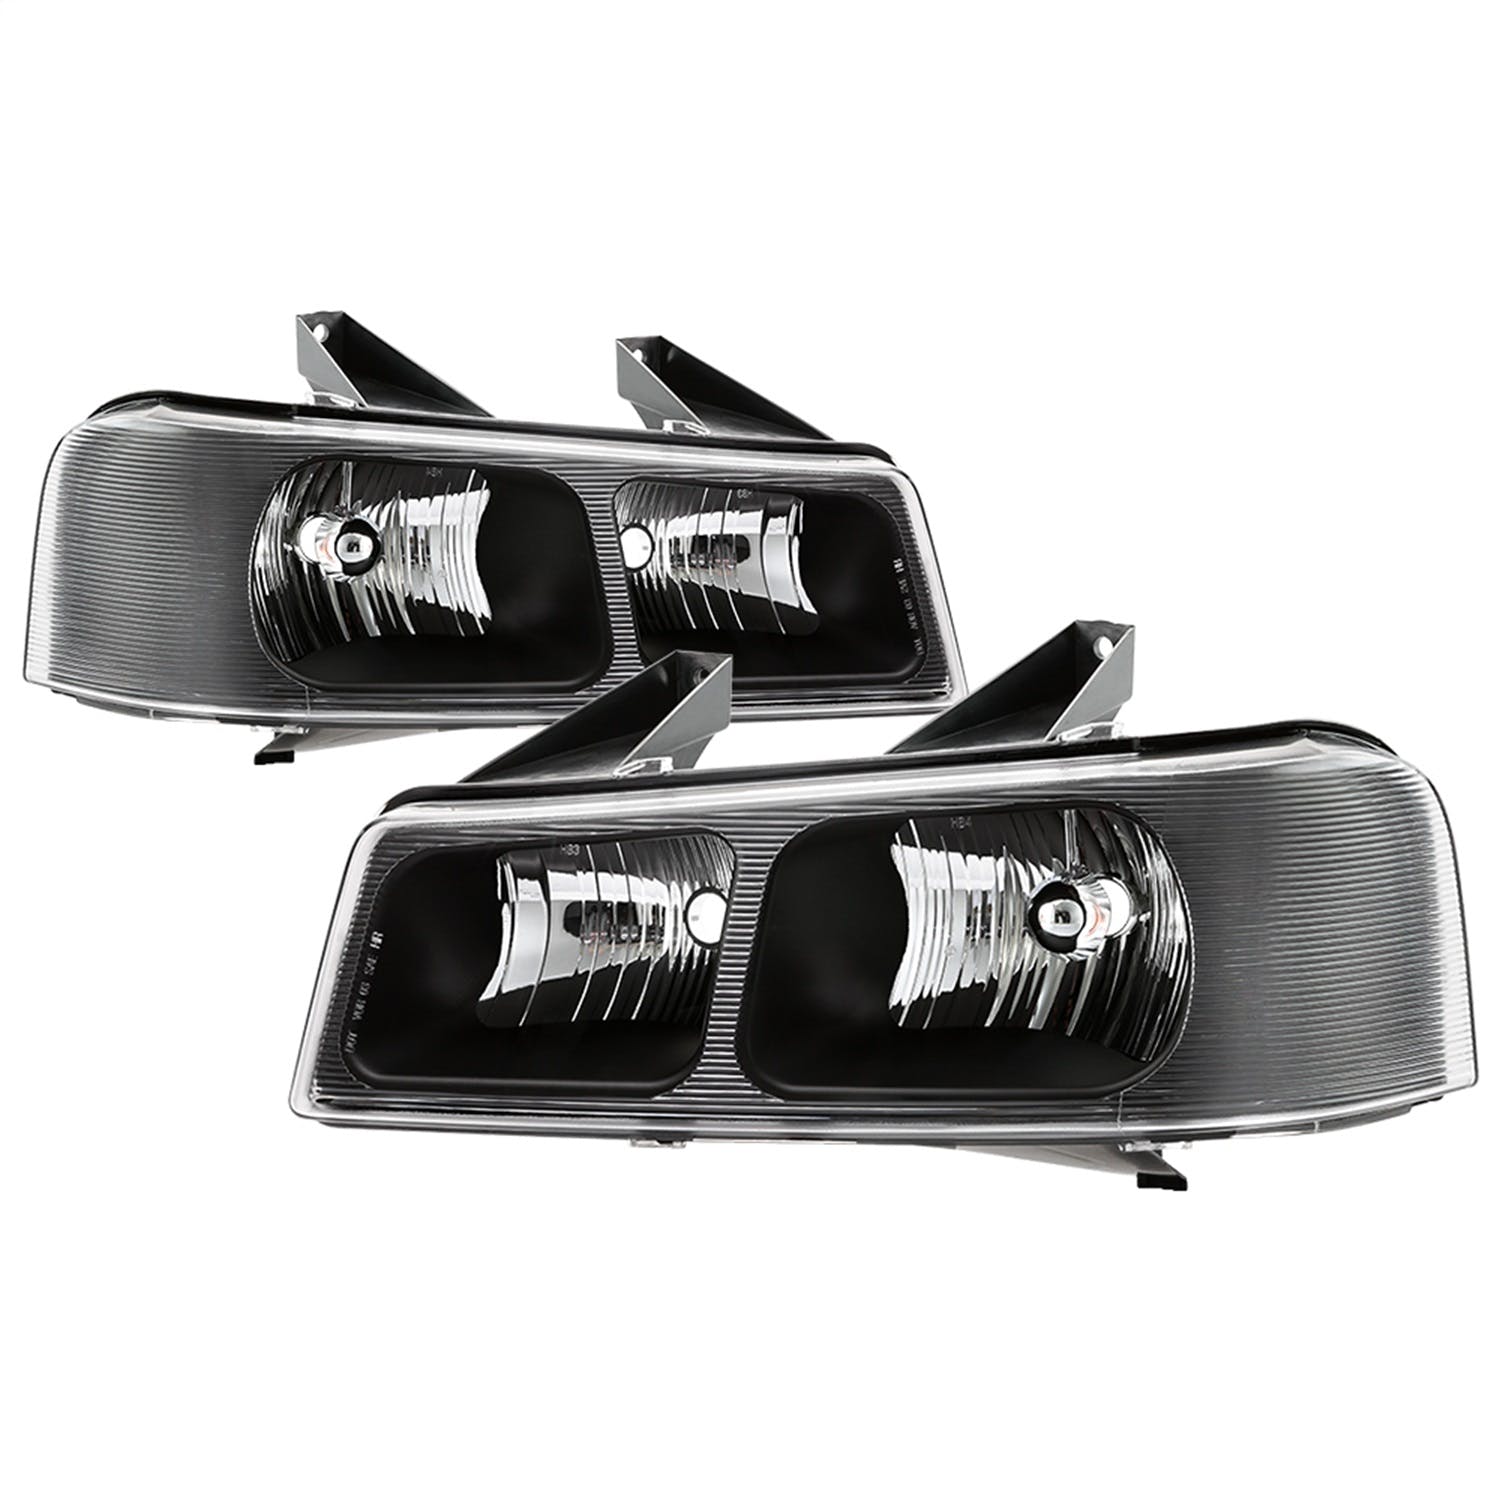 XTUNE POWER 9042485 Chevy Express 1500 2500 3500 03 19 GMC Savana 1500 2500 3500 03 19 OEM Style Headlights Low Beam HB4(Not Included) ; High Beam HB3(Not Included) Black